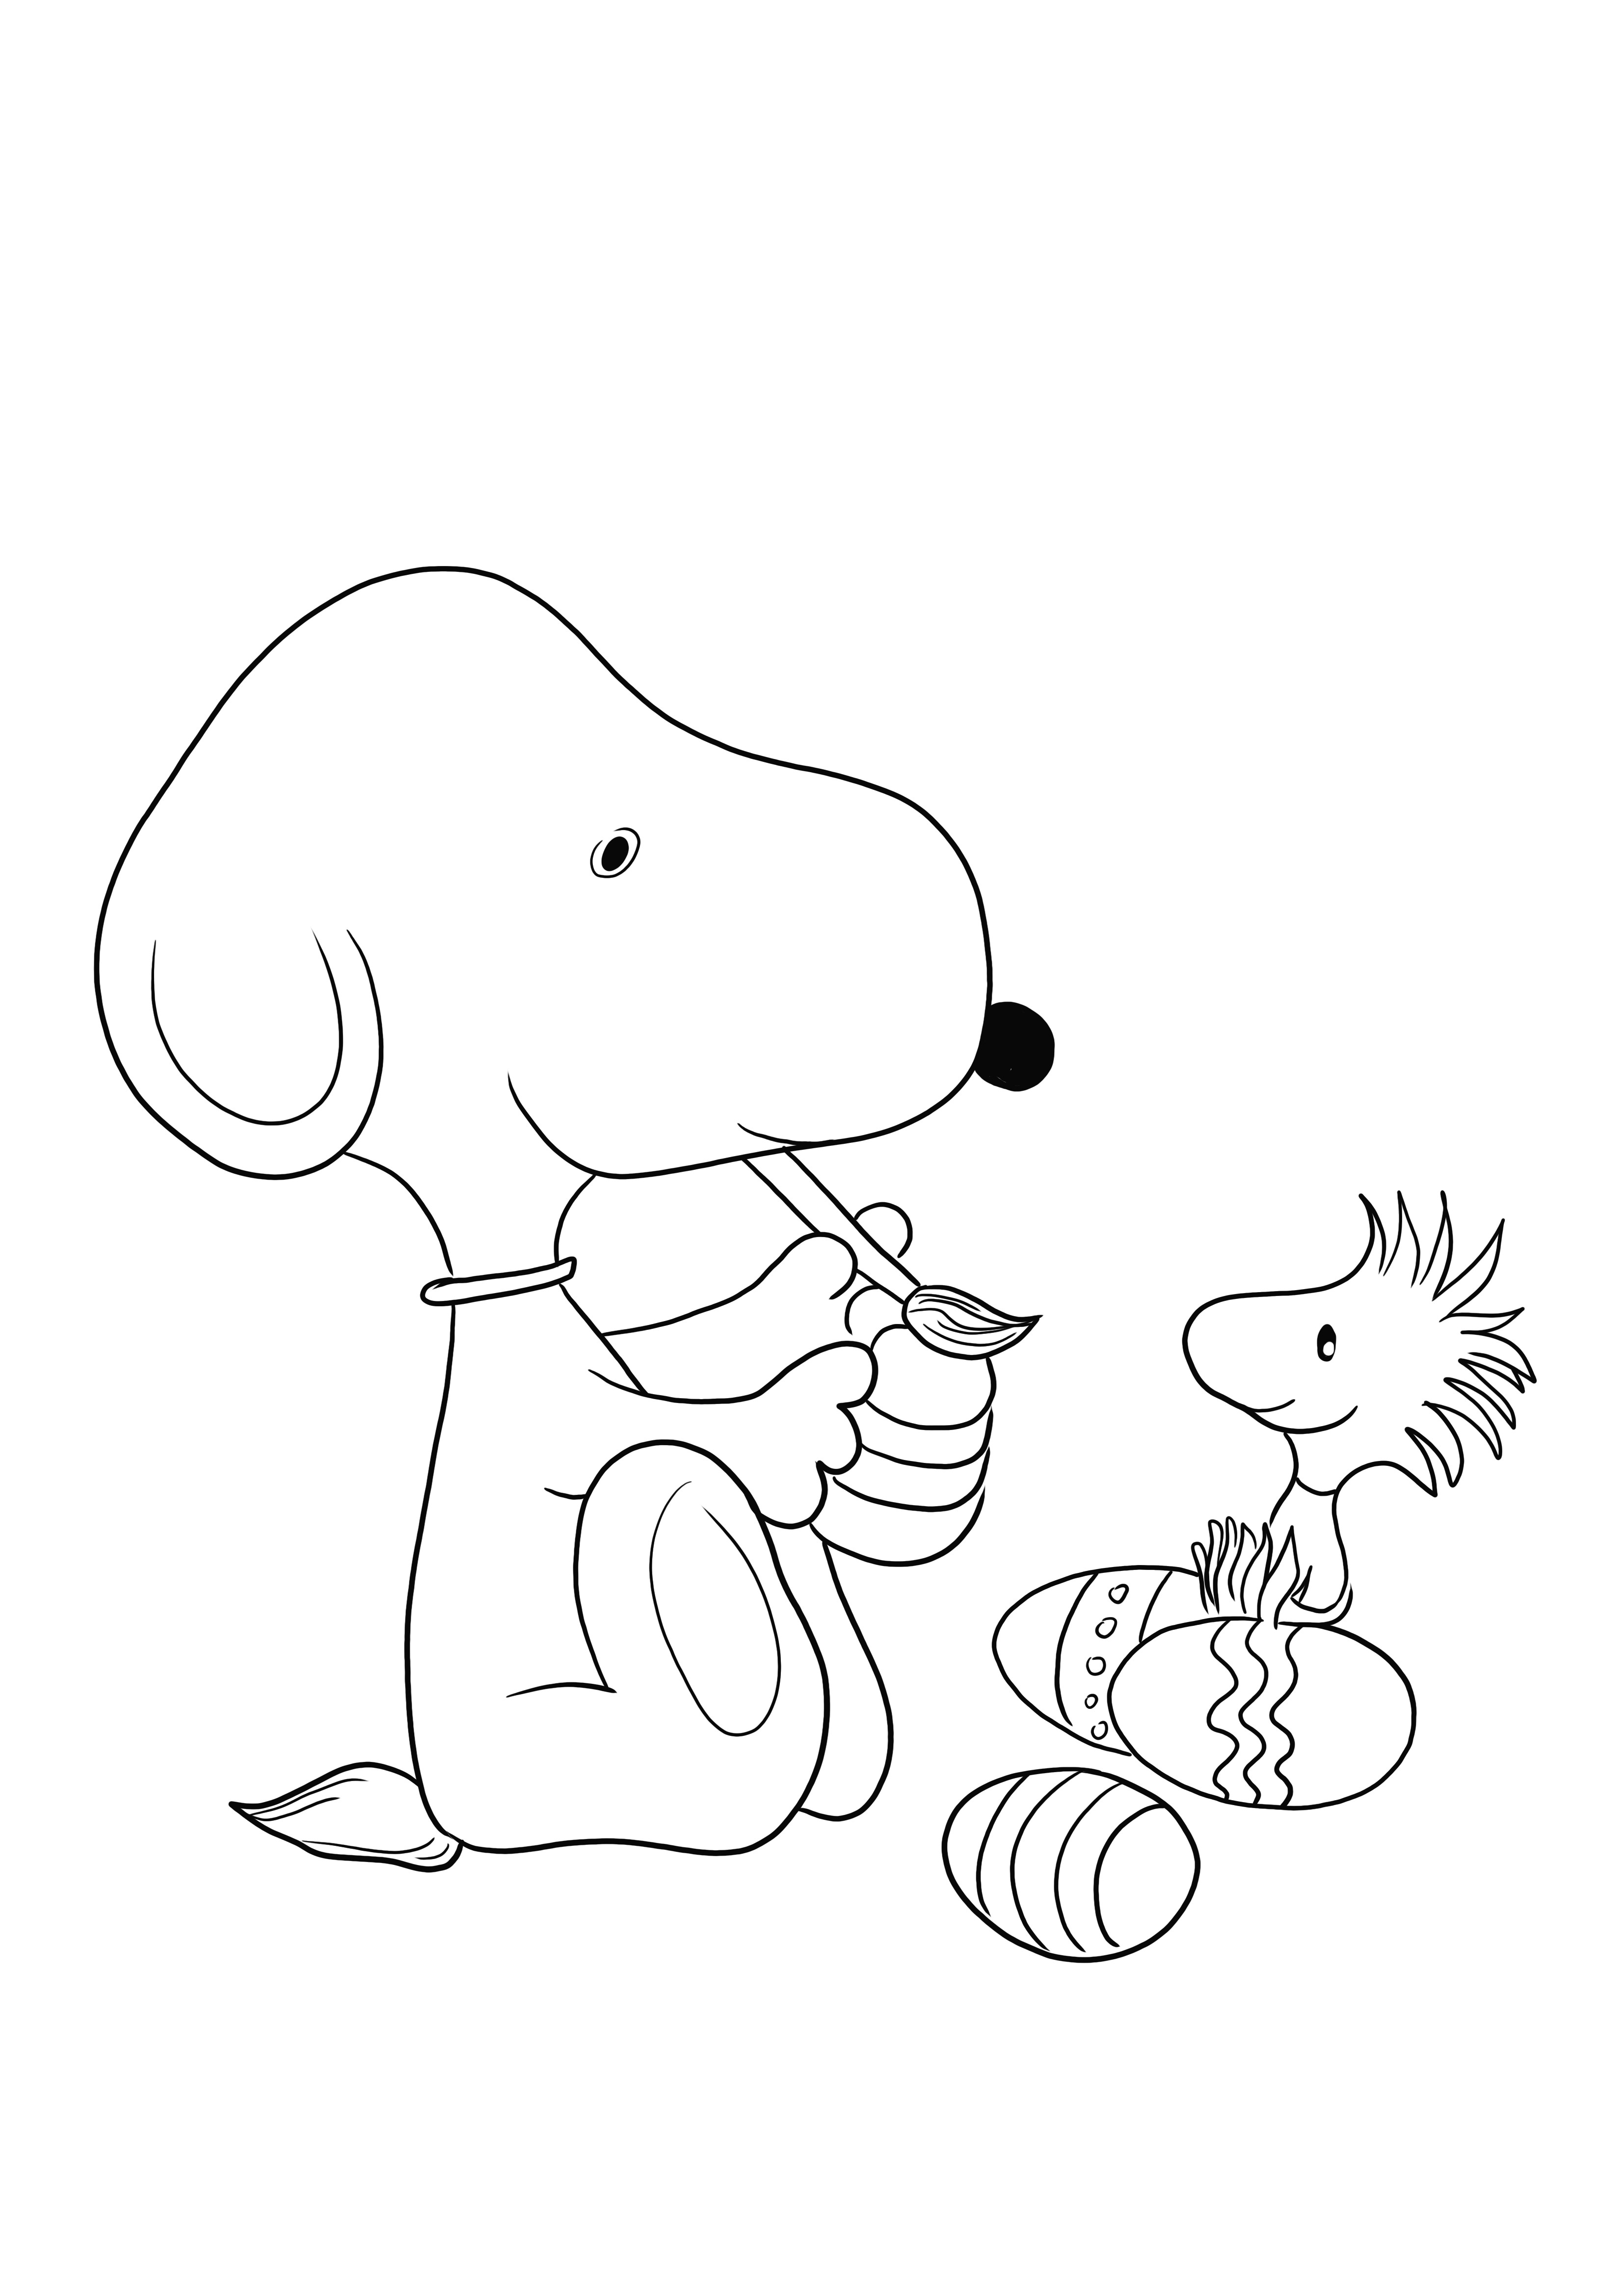 Snoopy from the Peanuts cartoon painting an Easter egg free to download and color image